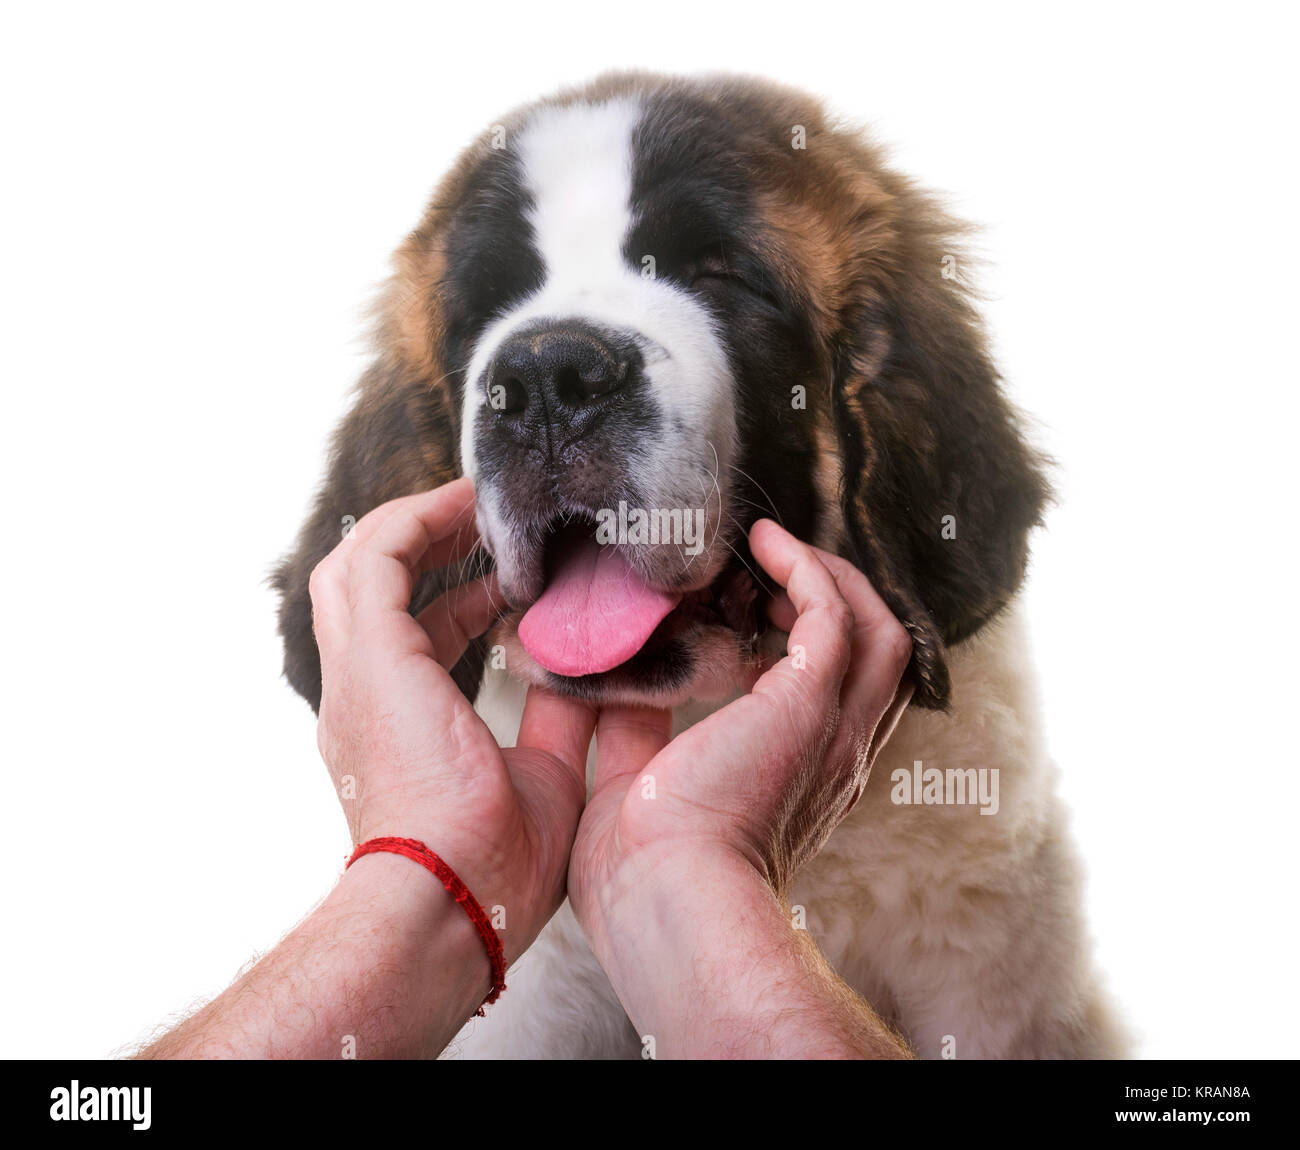 puppy saint bernard in front of white background Stock Photo